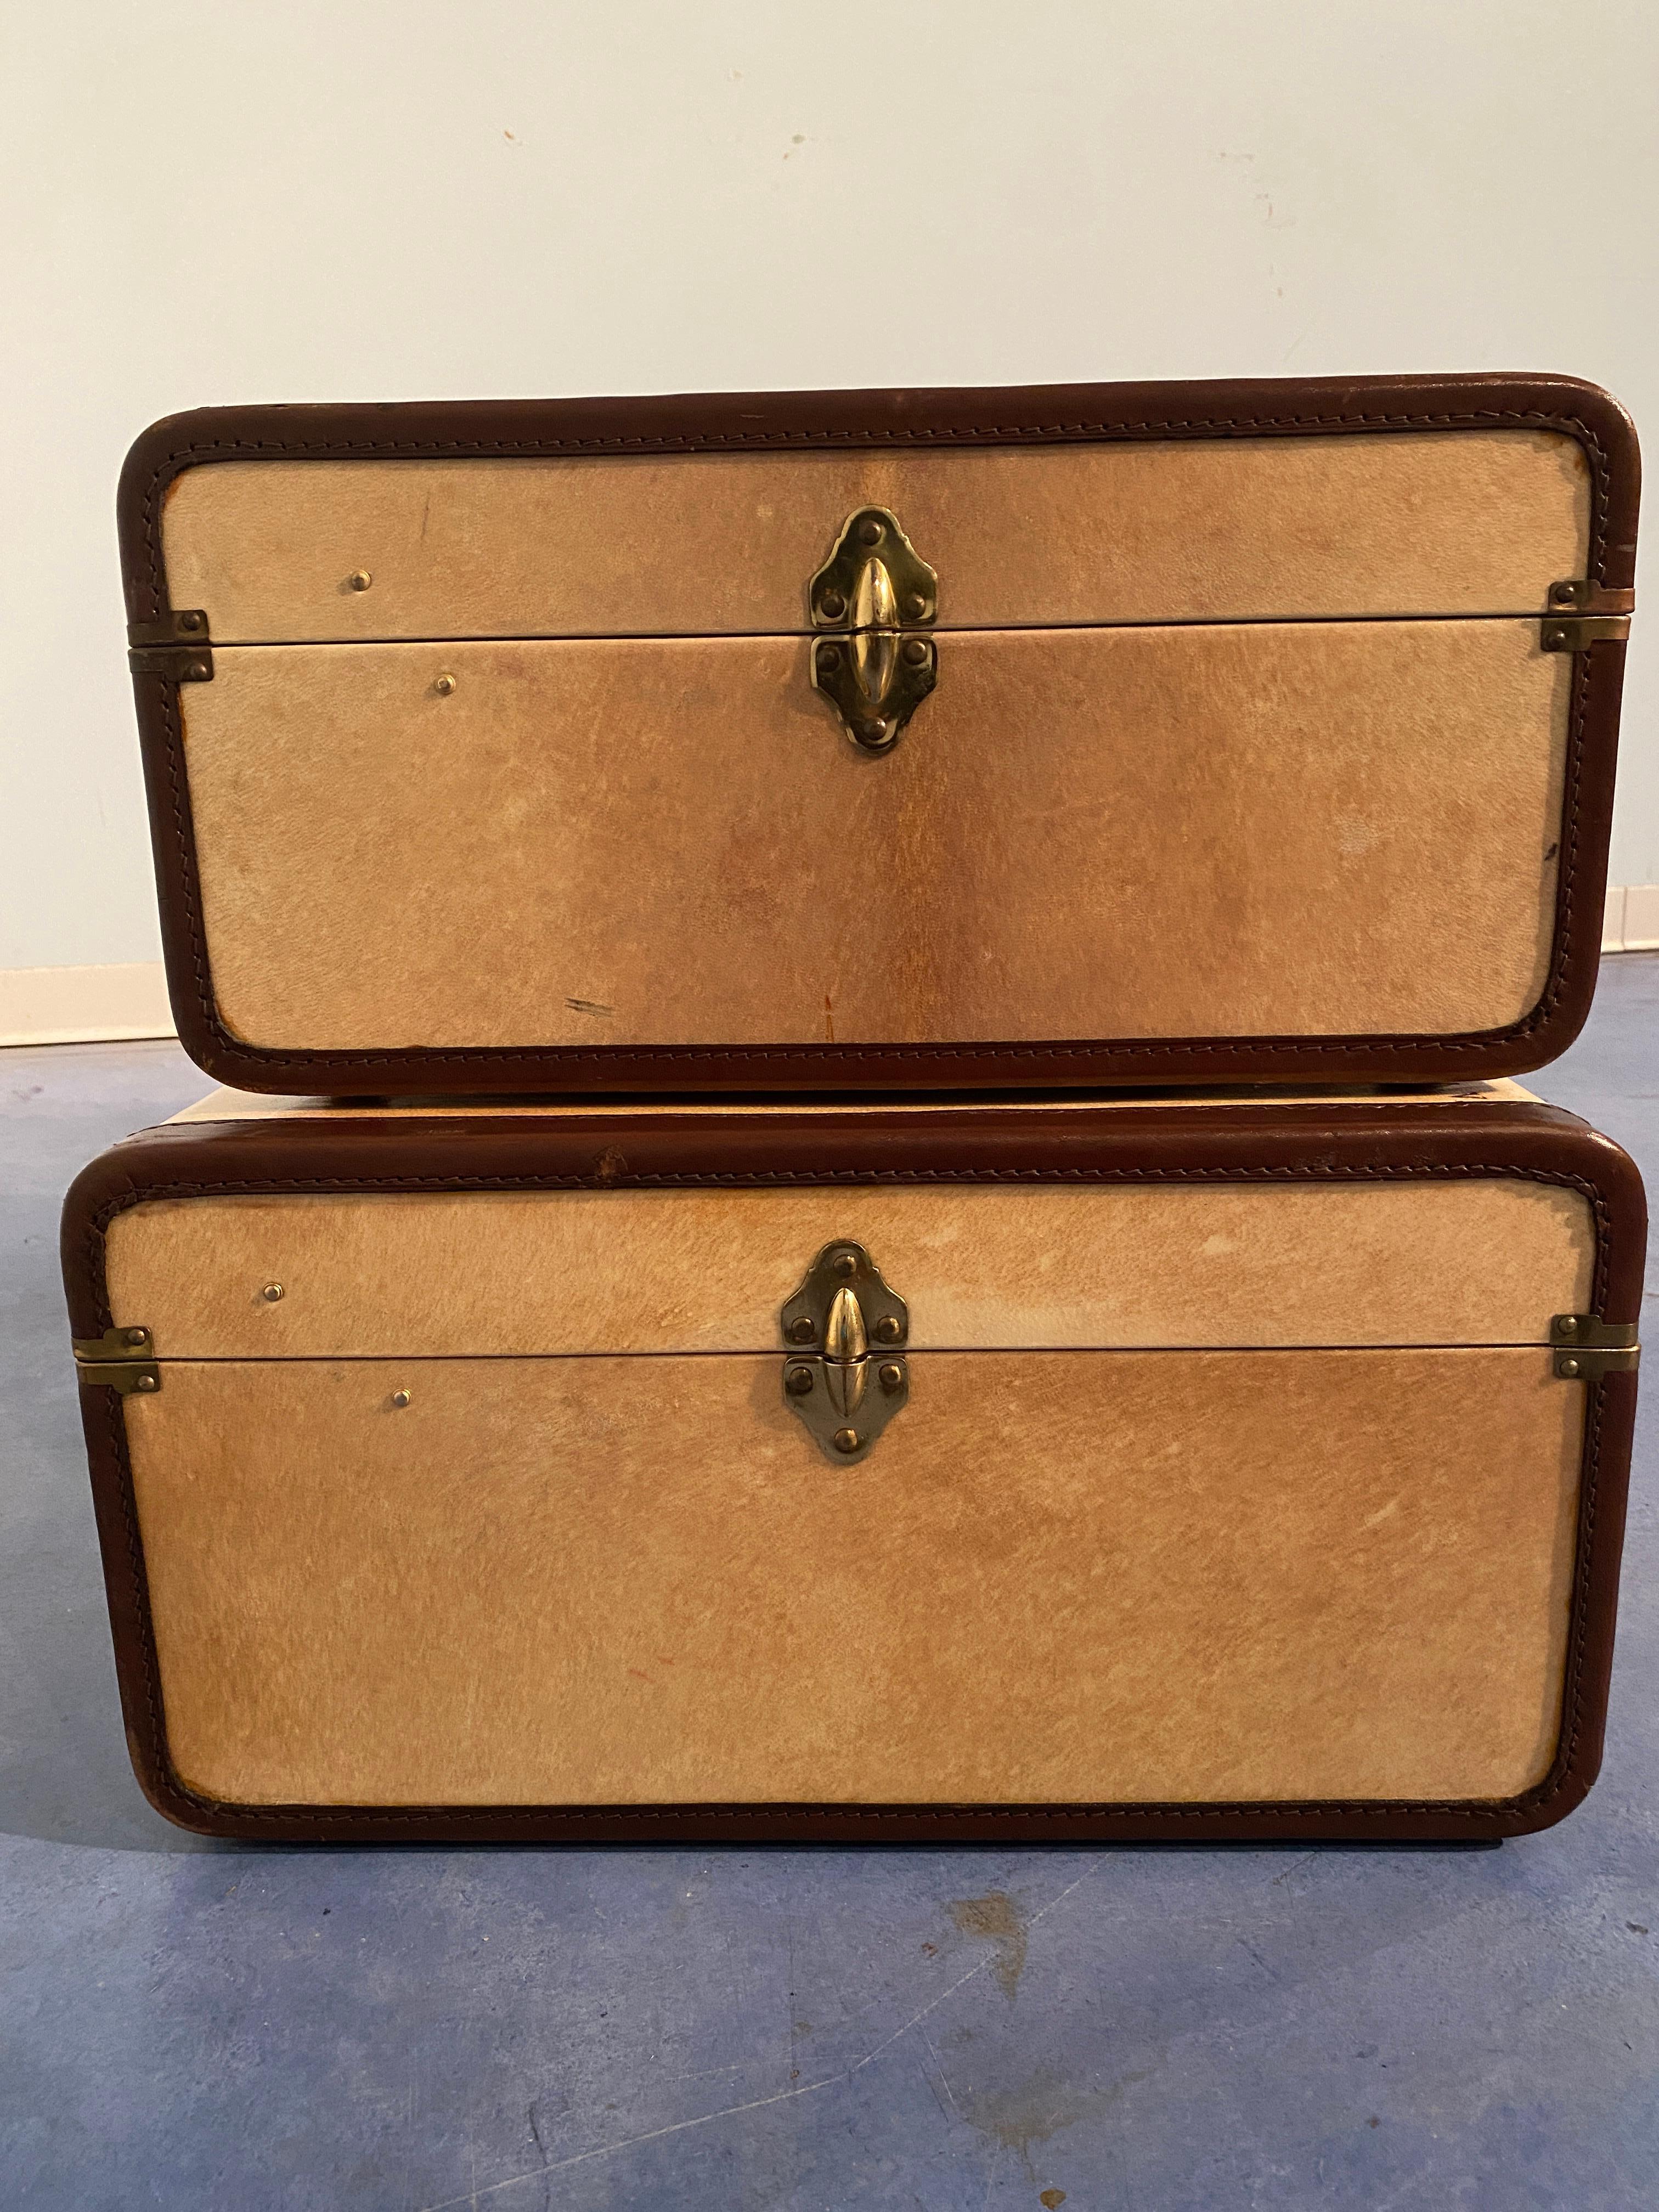 Italian Mid-Century Modern Parchment Paper Luggages or Suitcases Set of Two 1960 For Sale 14